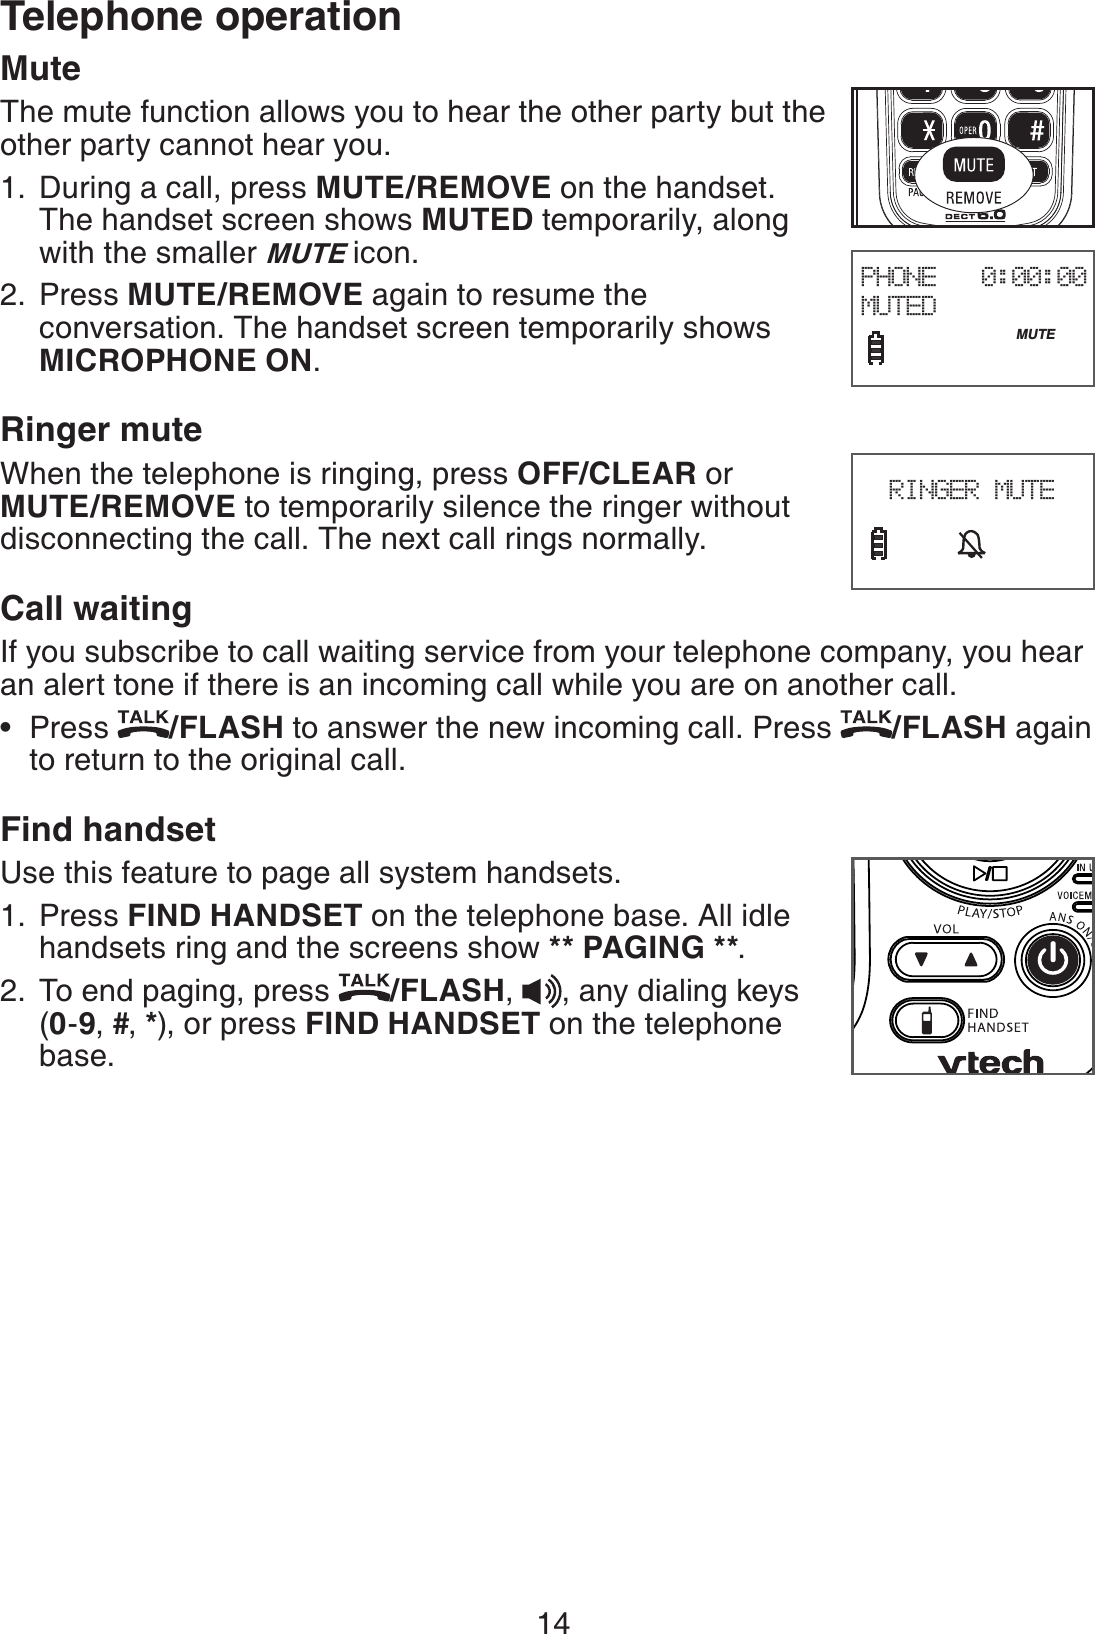 14Telephone operationMuteThe mute function allows you to hear the other party but the other party cannot hear you.During a call, press MUTE/REMOVE on the handset. The handset screen shows MUTED temporarily, along with the smaller MUTE icon.Press MUTE/REMOVE again to resume the conversation. The handset screen temporarily shows MICROPHONE ON.Ringer muteWhen the telephone is ringing, press OFF/CLEAR or MUTE/REMOVE to temporarily silence the ringer without disconnecting the call. The next call rings normally.Call waitingIf you subscribe to call waiting service from your telephone company, you hear an alert tone if there is an incoming call while you are on another call.Press  /FLASH to answer the new incoming call. Press  /FLASH again to return to the original call.Find handsetUse this feature to page all system handsets.Press FIND HANDSET on the telephone base. All idle handsets ring and the screens show ** PAGING **.To end paging, press  /FLASH,  , any dialing keys (0-9, #, *), or press FIND HANDSET on the telephone base.1.2.•1.2.PHONE   0:00:00MUTED                              MUTE       RINGER MUTE